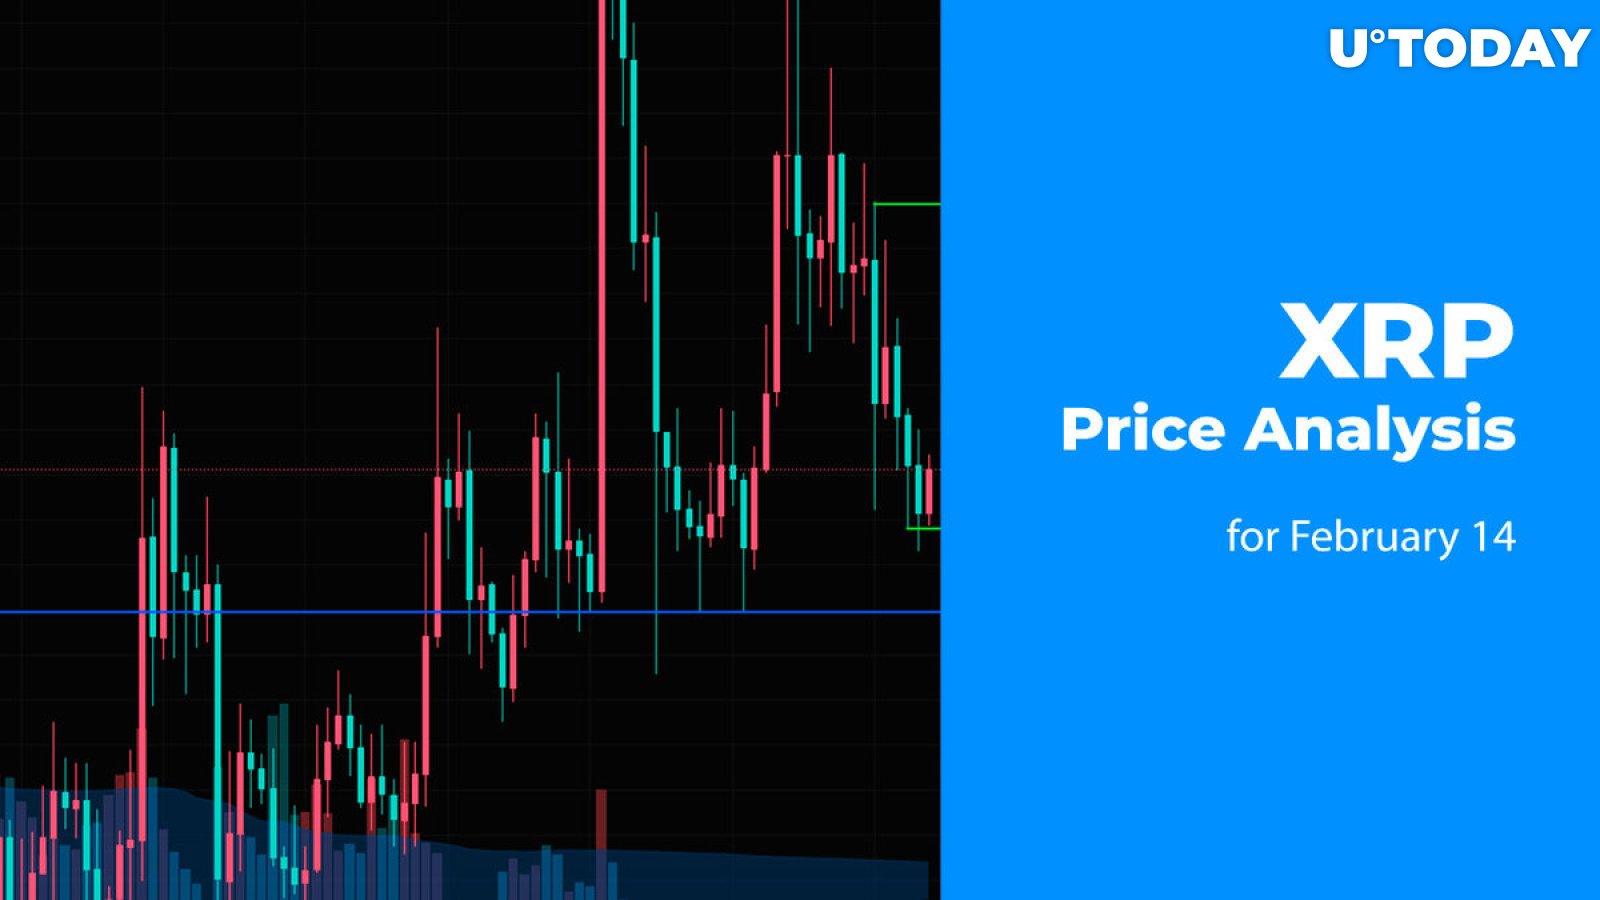 XRP Price Prediction for February 14